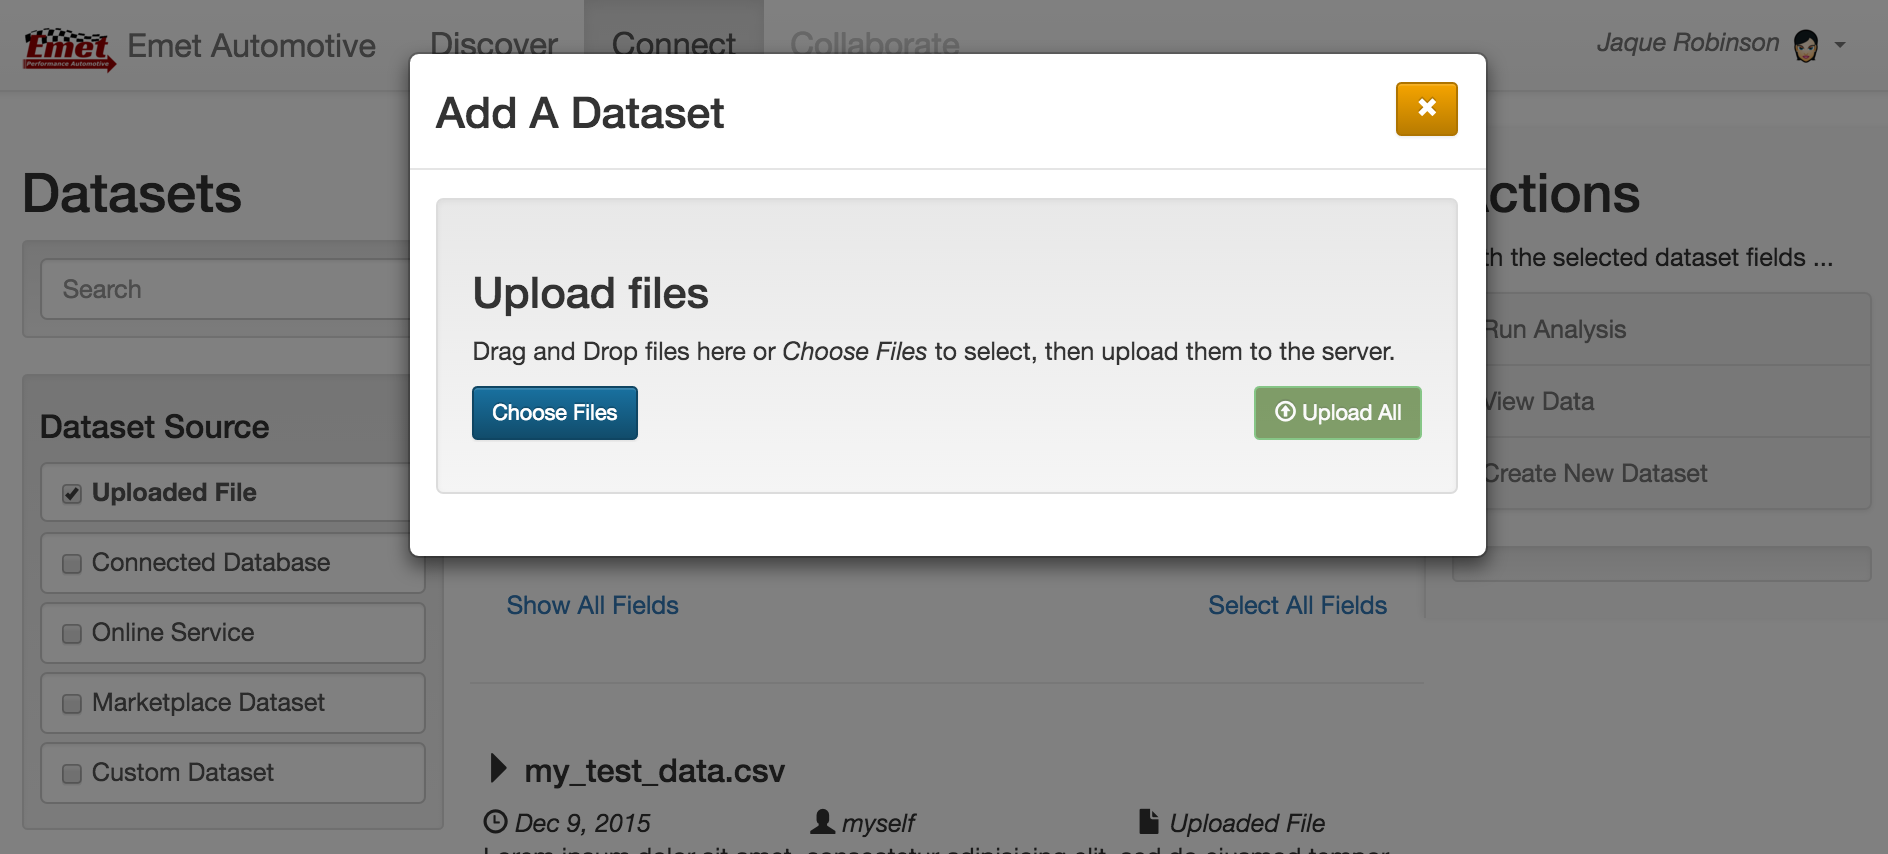 This screen shot of the MVP shows the upload interface for adding private company datasets.